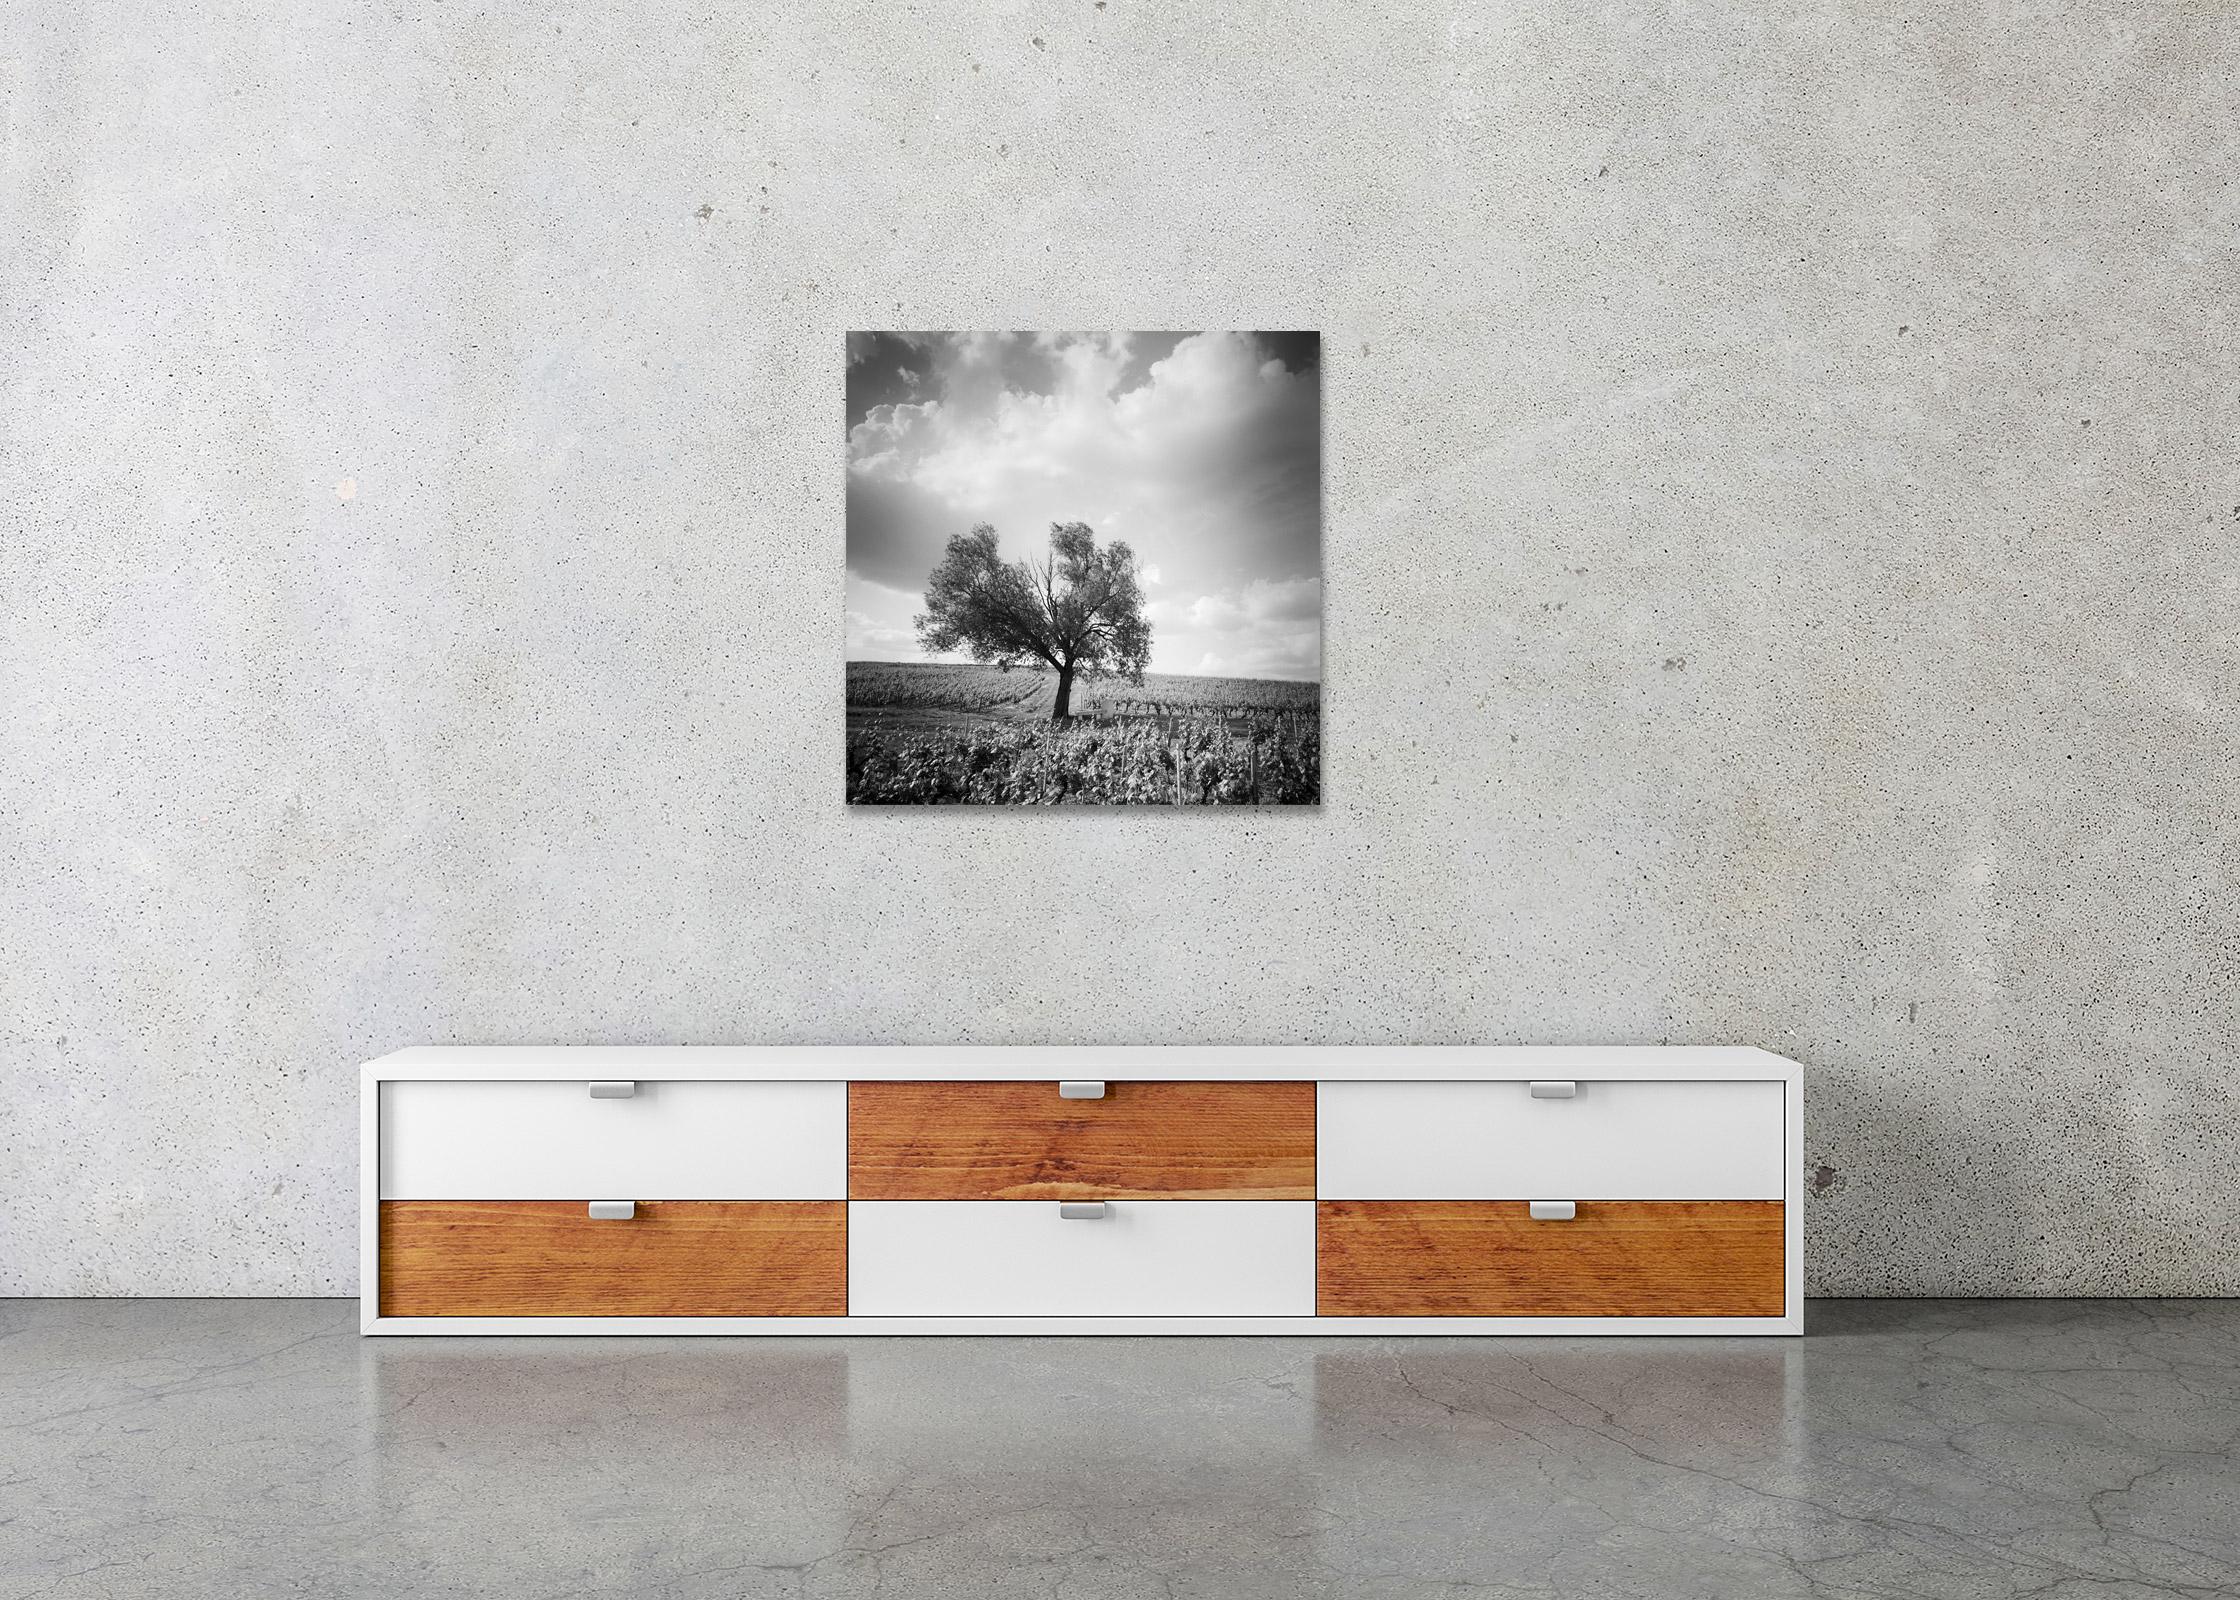 Black and White Fine Art Landscape Photography - Tree in the middle of beautiful vineyard with big clouds in Bordeaux, France. Archival pigment ink print, edition of 9. Signed, titled, dated and numbered by artist. Certificate of authenticity